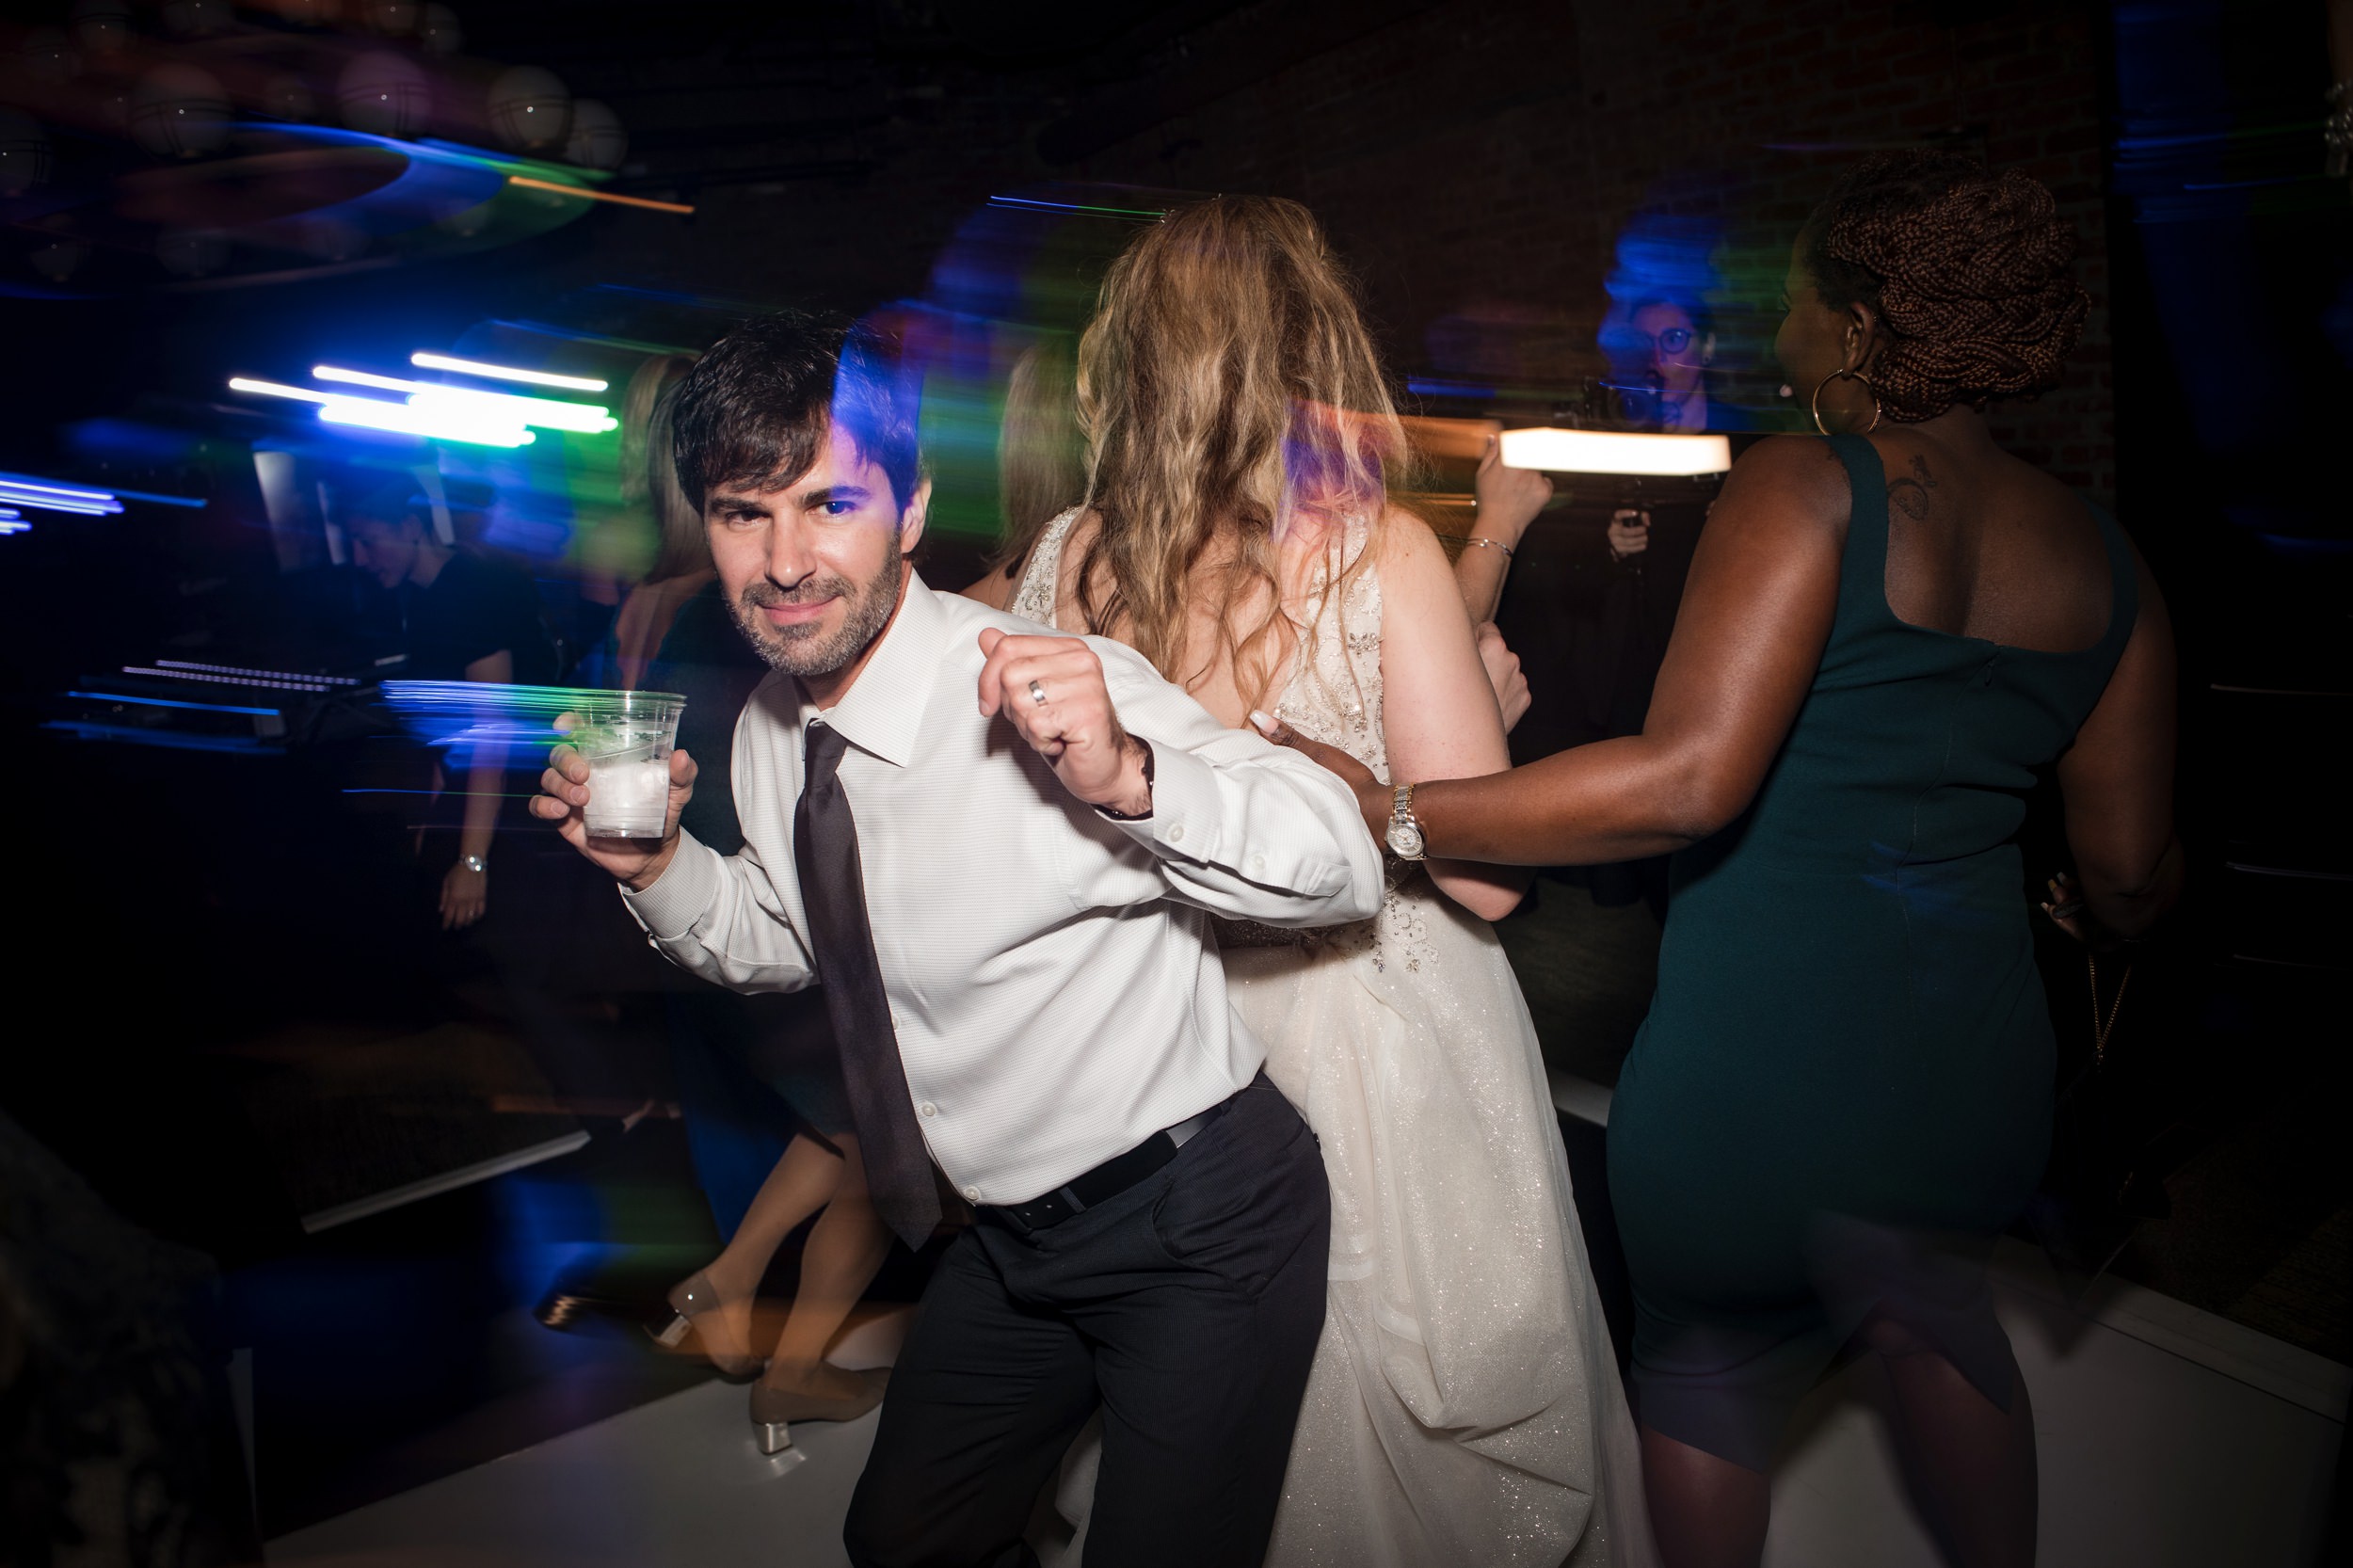 Guests dancing at a Beekman Hotel wedding in NYC